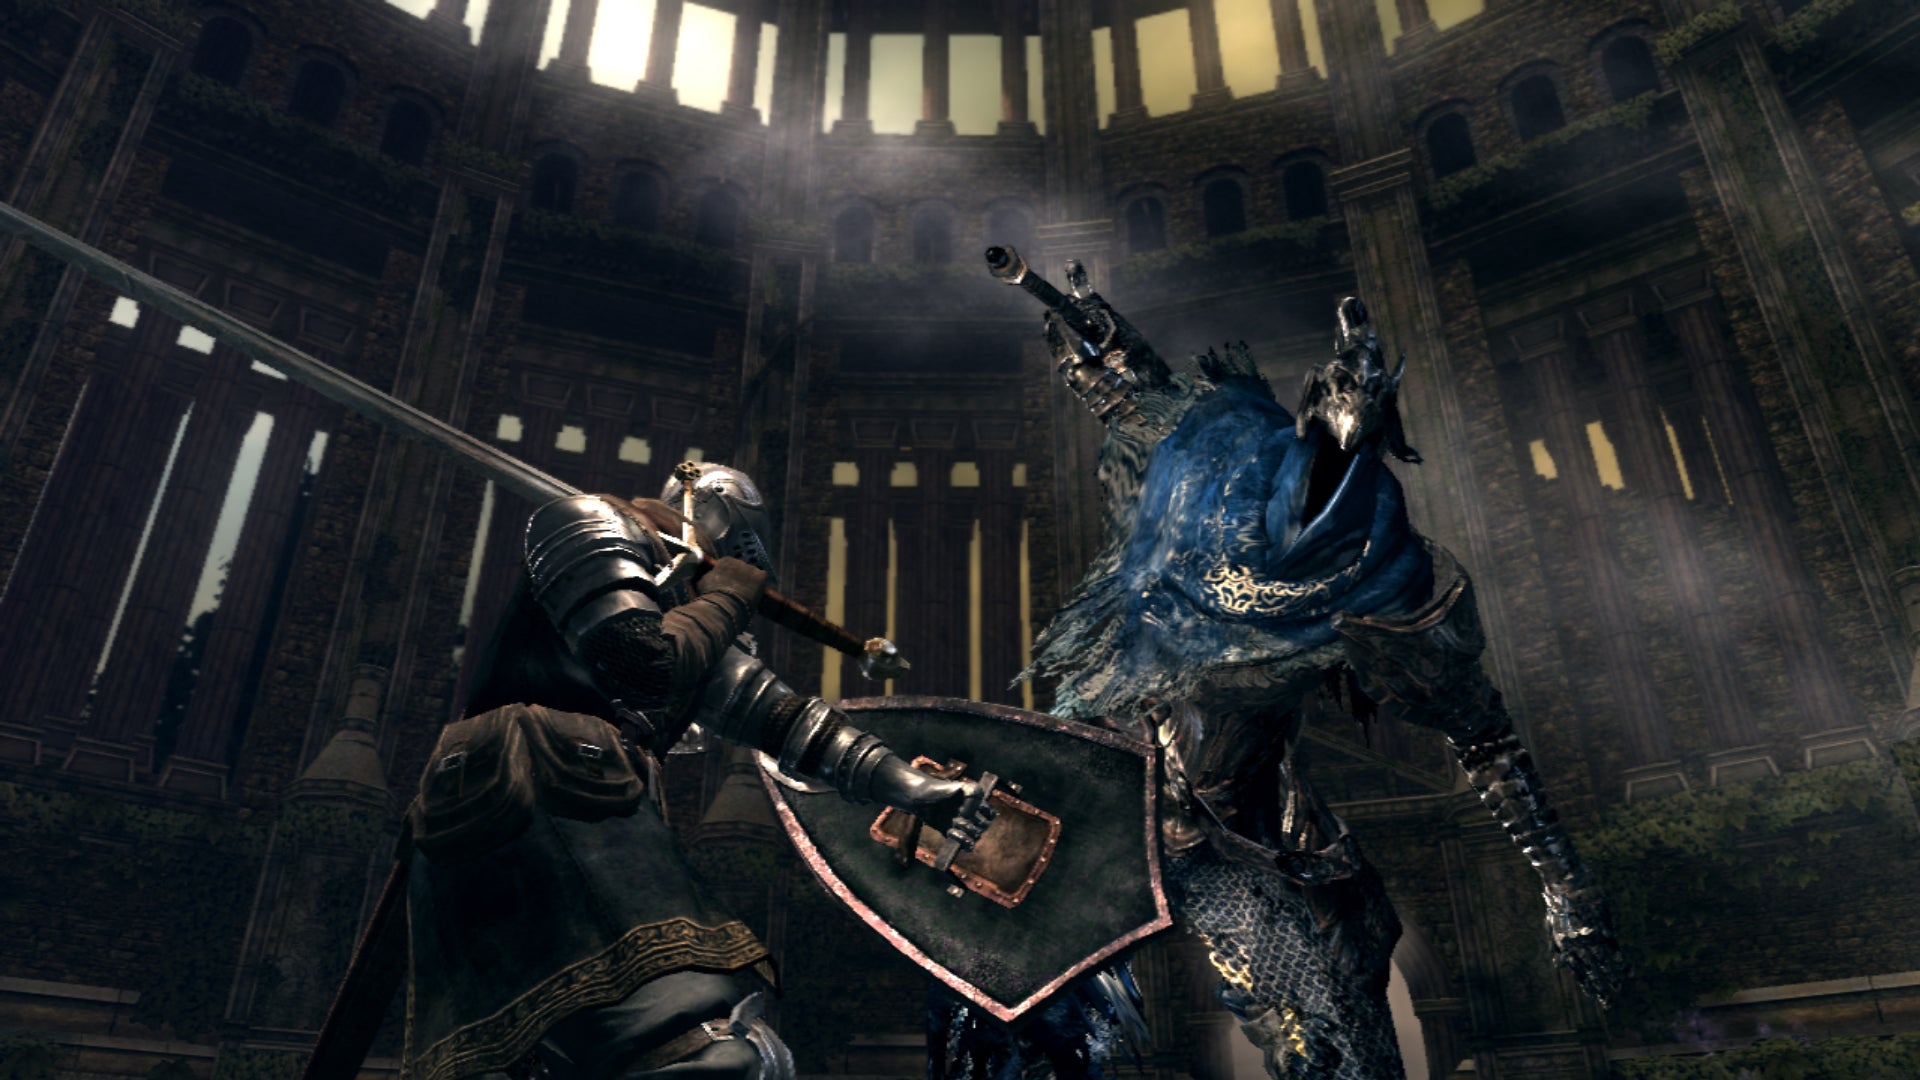 A warrior fights a big beast in an ornate hall in Dark Souls: Prepare To Die Edition